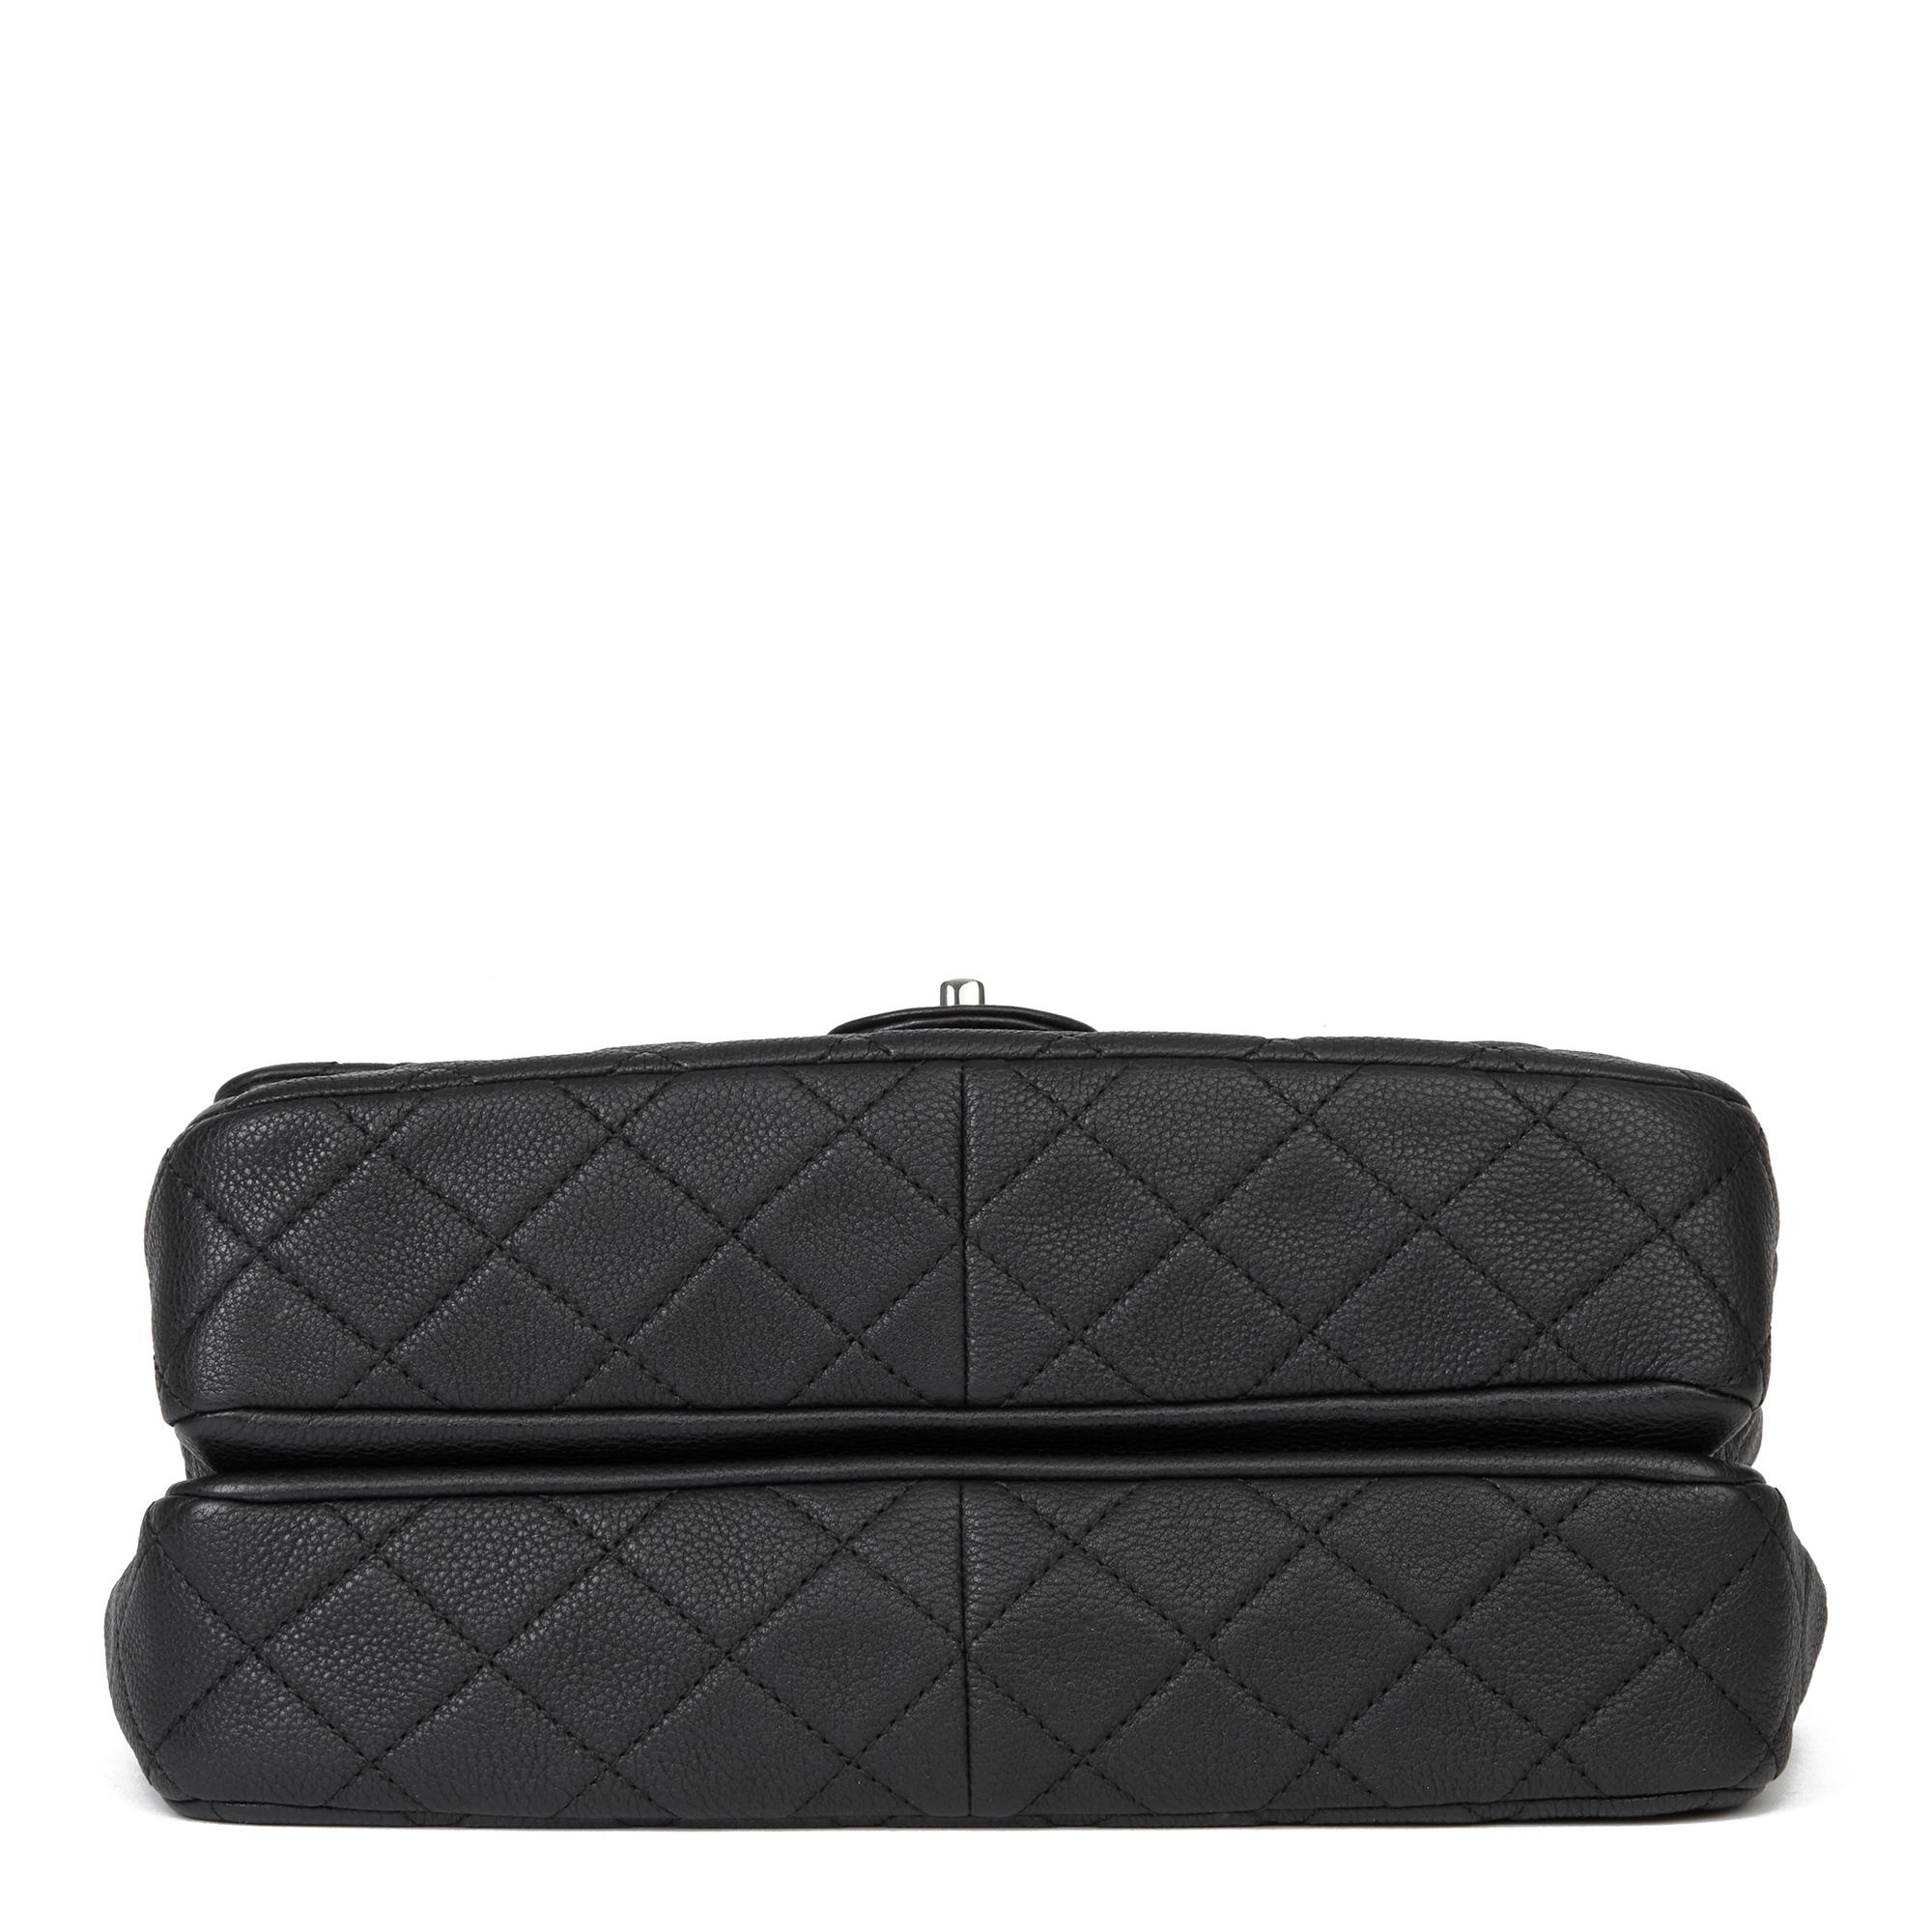 2013 Chanel Black Quilted Washed Caviar Leather Double Gusset Single Flap Bag 2